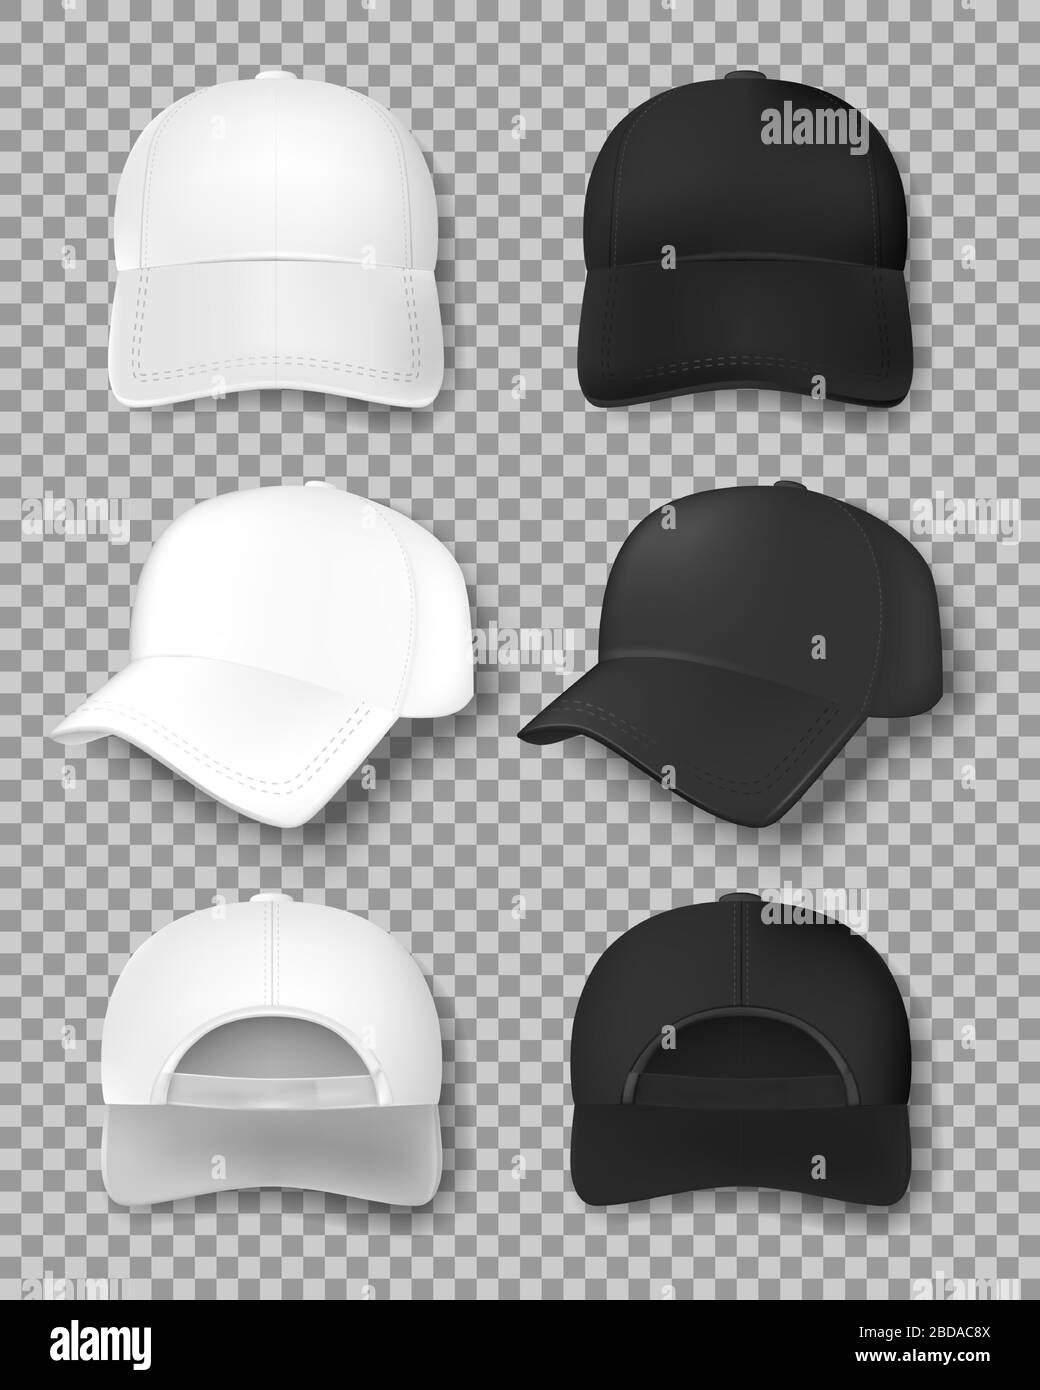 Realistic Baseball cap mockup isolated on transparent background. White and black textile cap front, back and side view. Uniform hat template. Vector Stock Vector